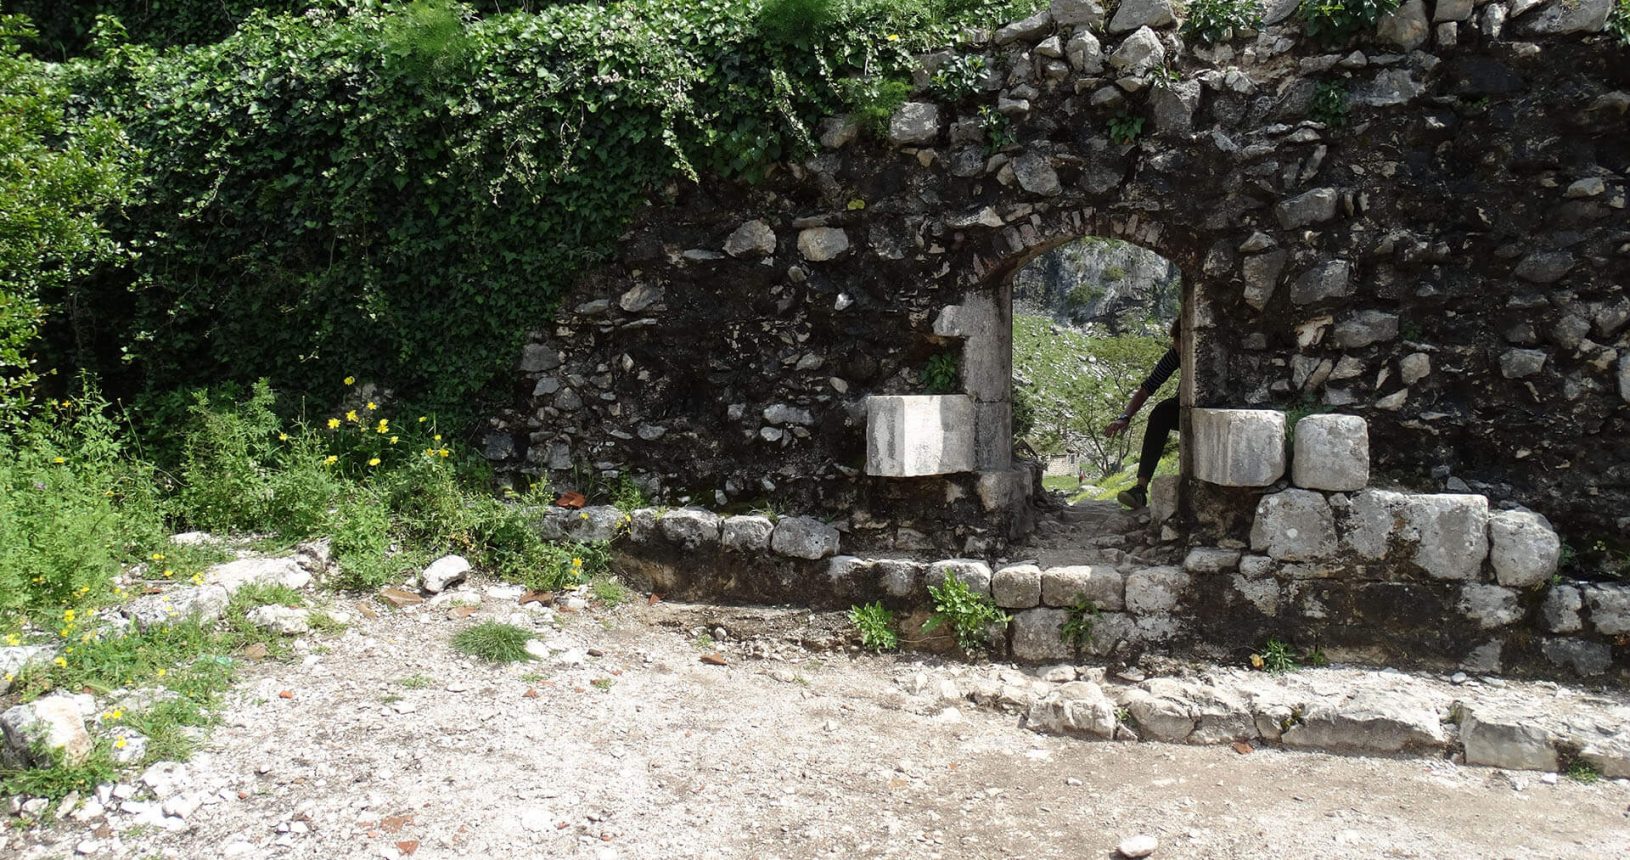 Entrance on the free way to Kotor Fortress